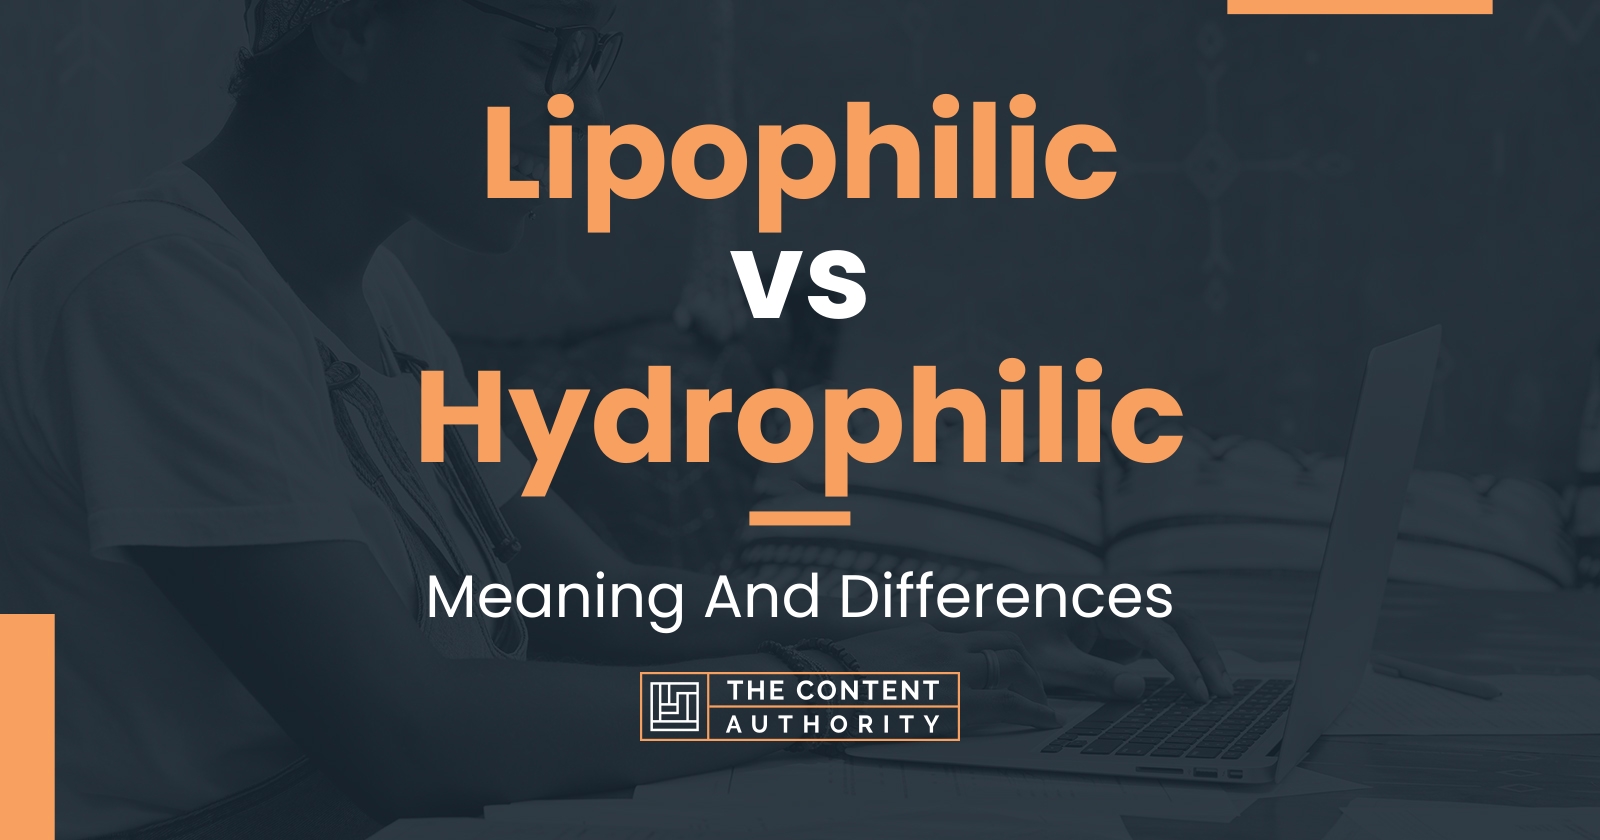 Lipophilic vs Hydrophilic: Meaning And Differences